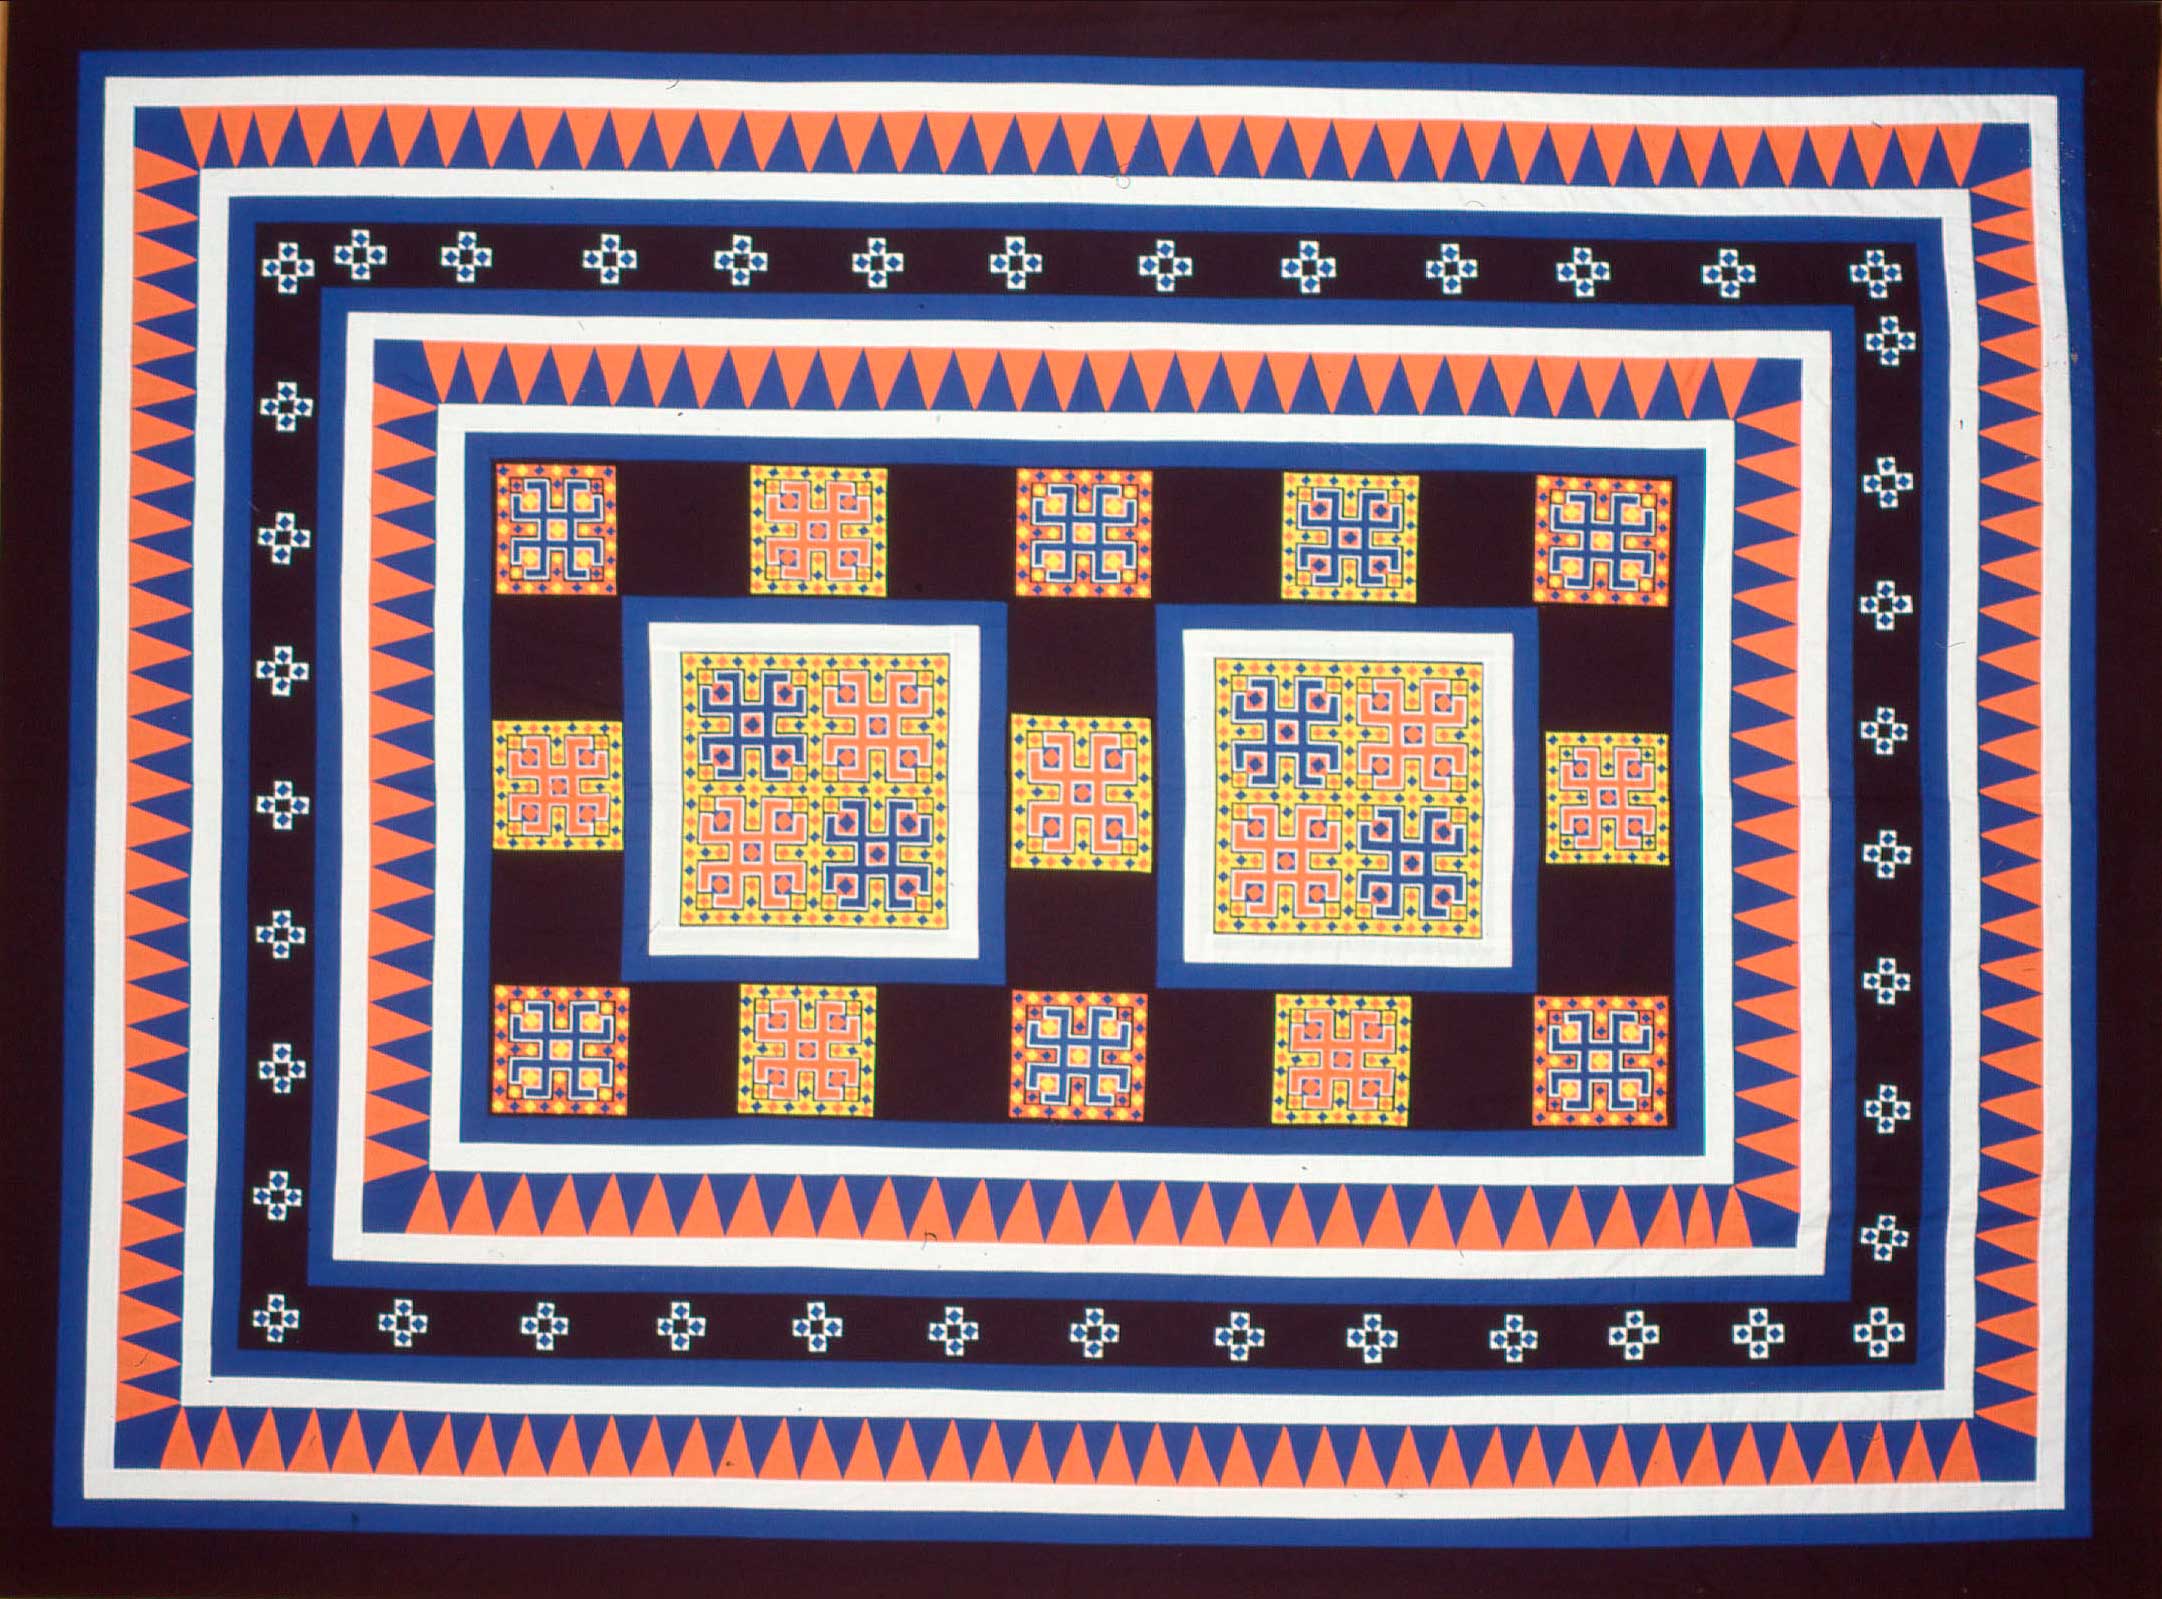 Applique and reverse applique tapestry made by Shoua Moua Chang in Ban Vinai Refugee Camp, Thailand, 1984